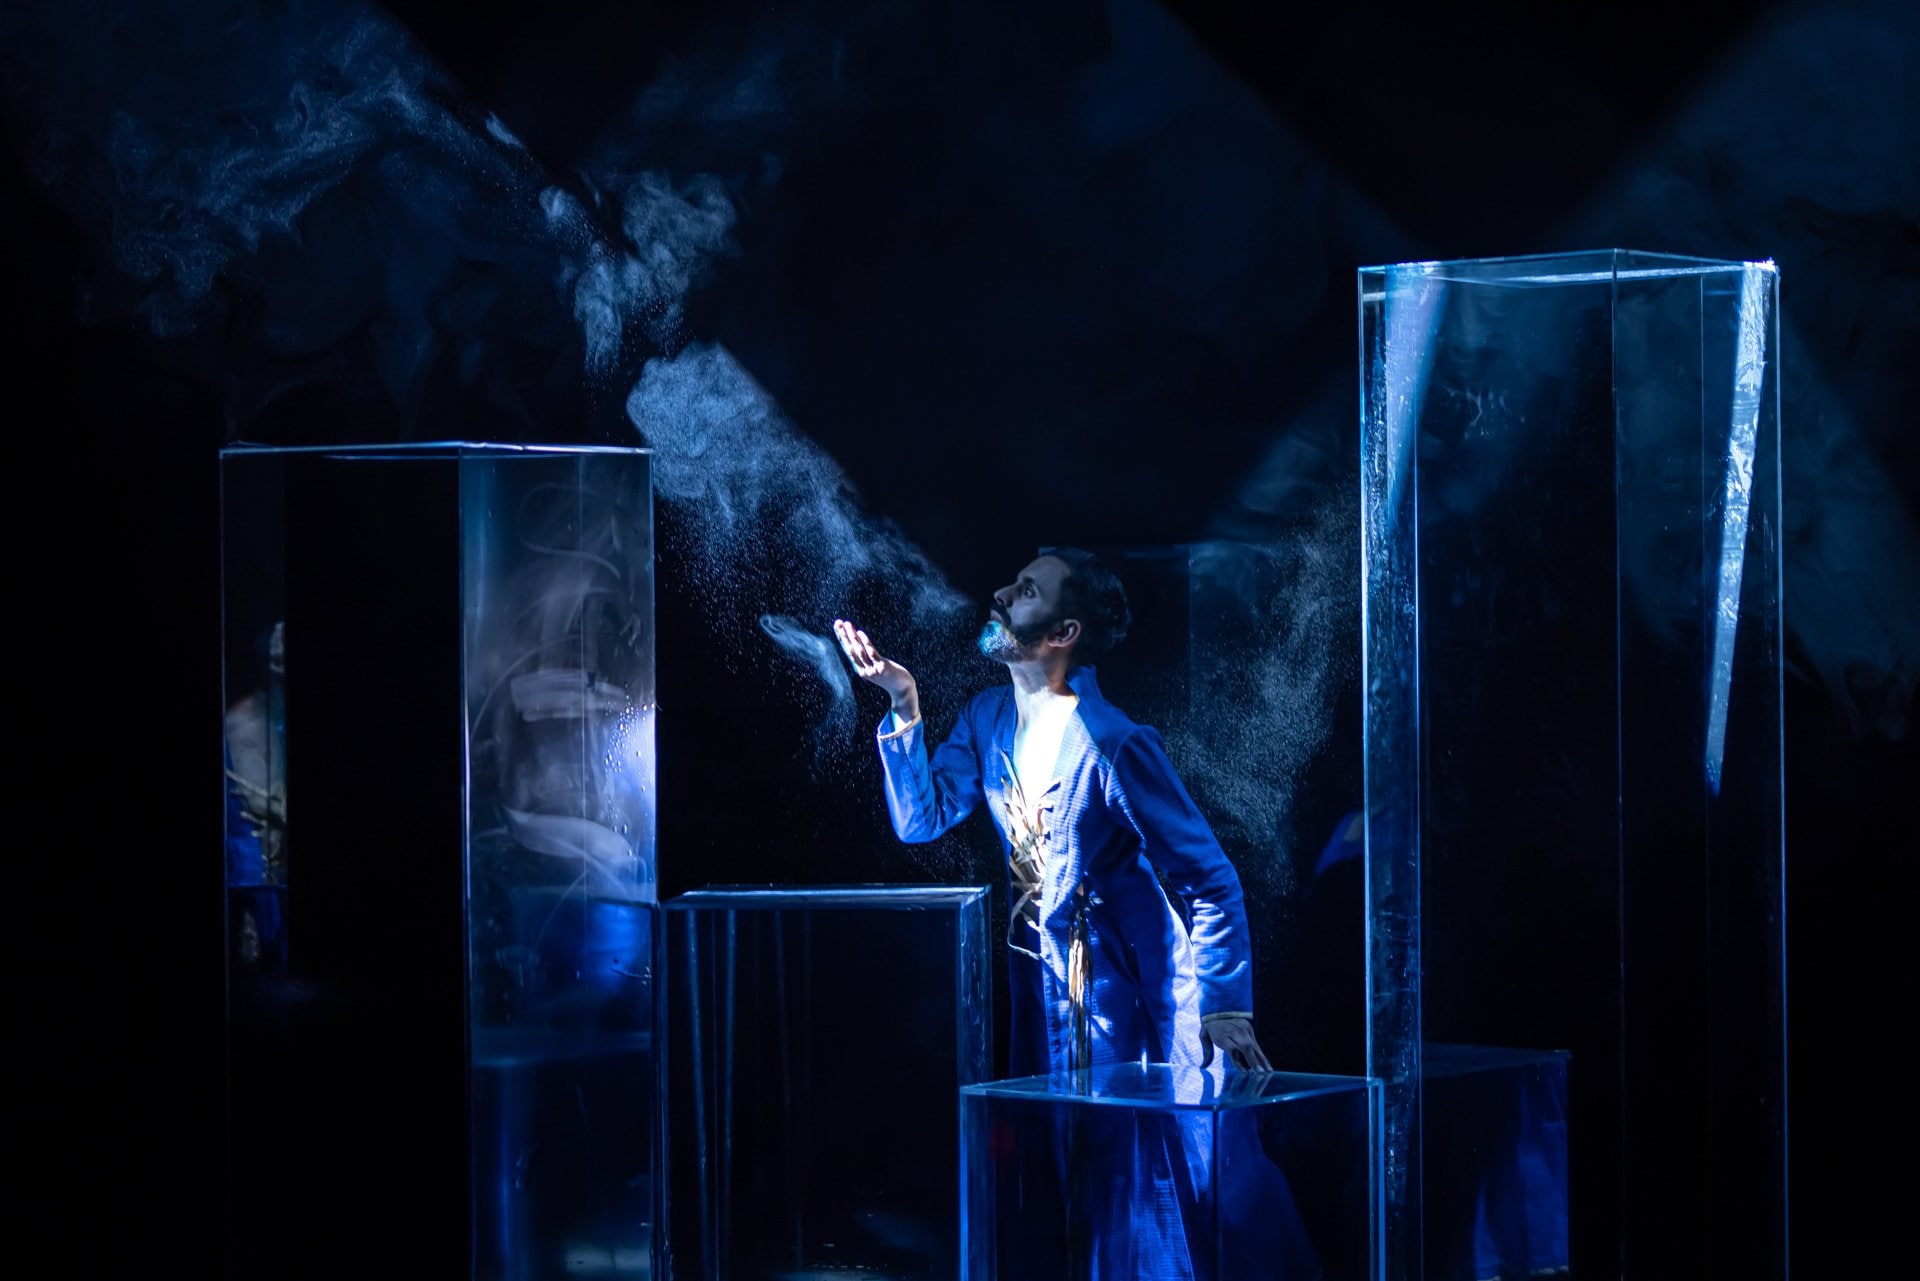 Aakash Odedra facing a ray of light on stage, in a blue tunic. 